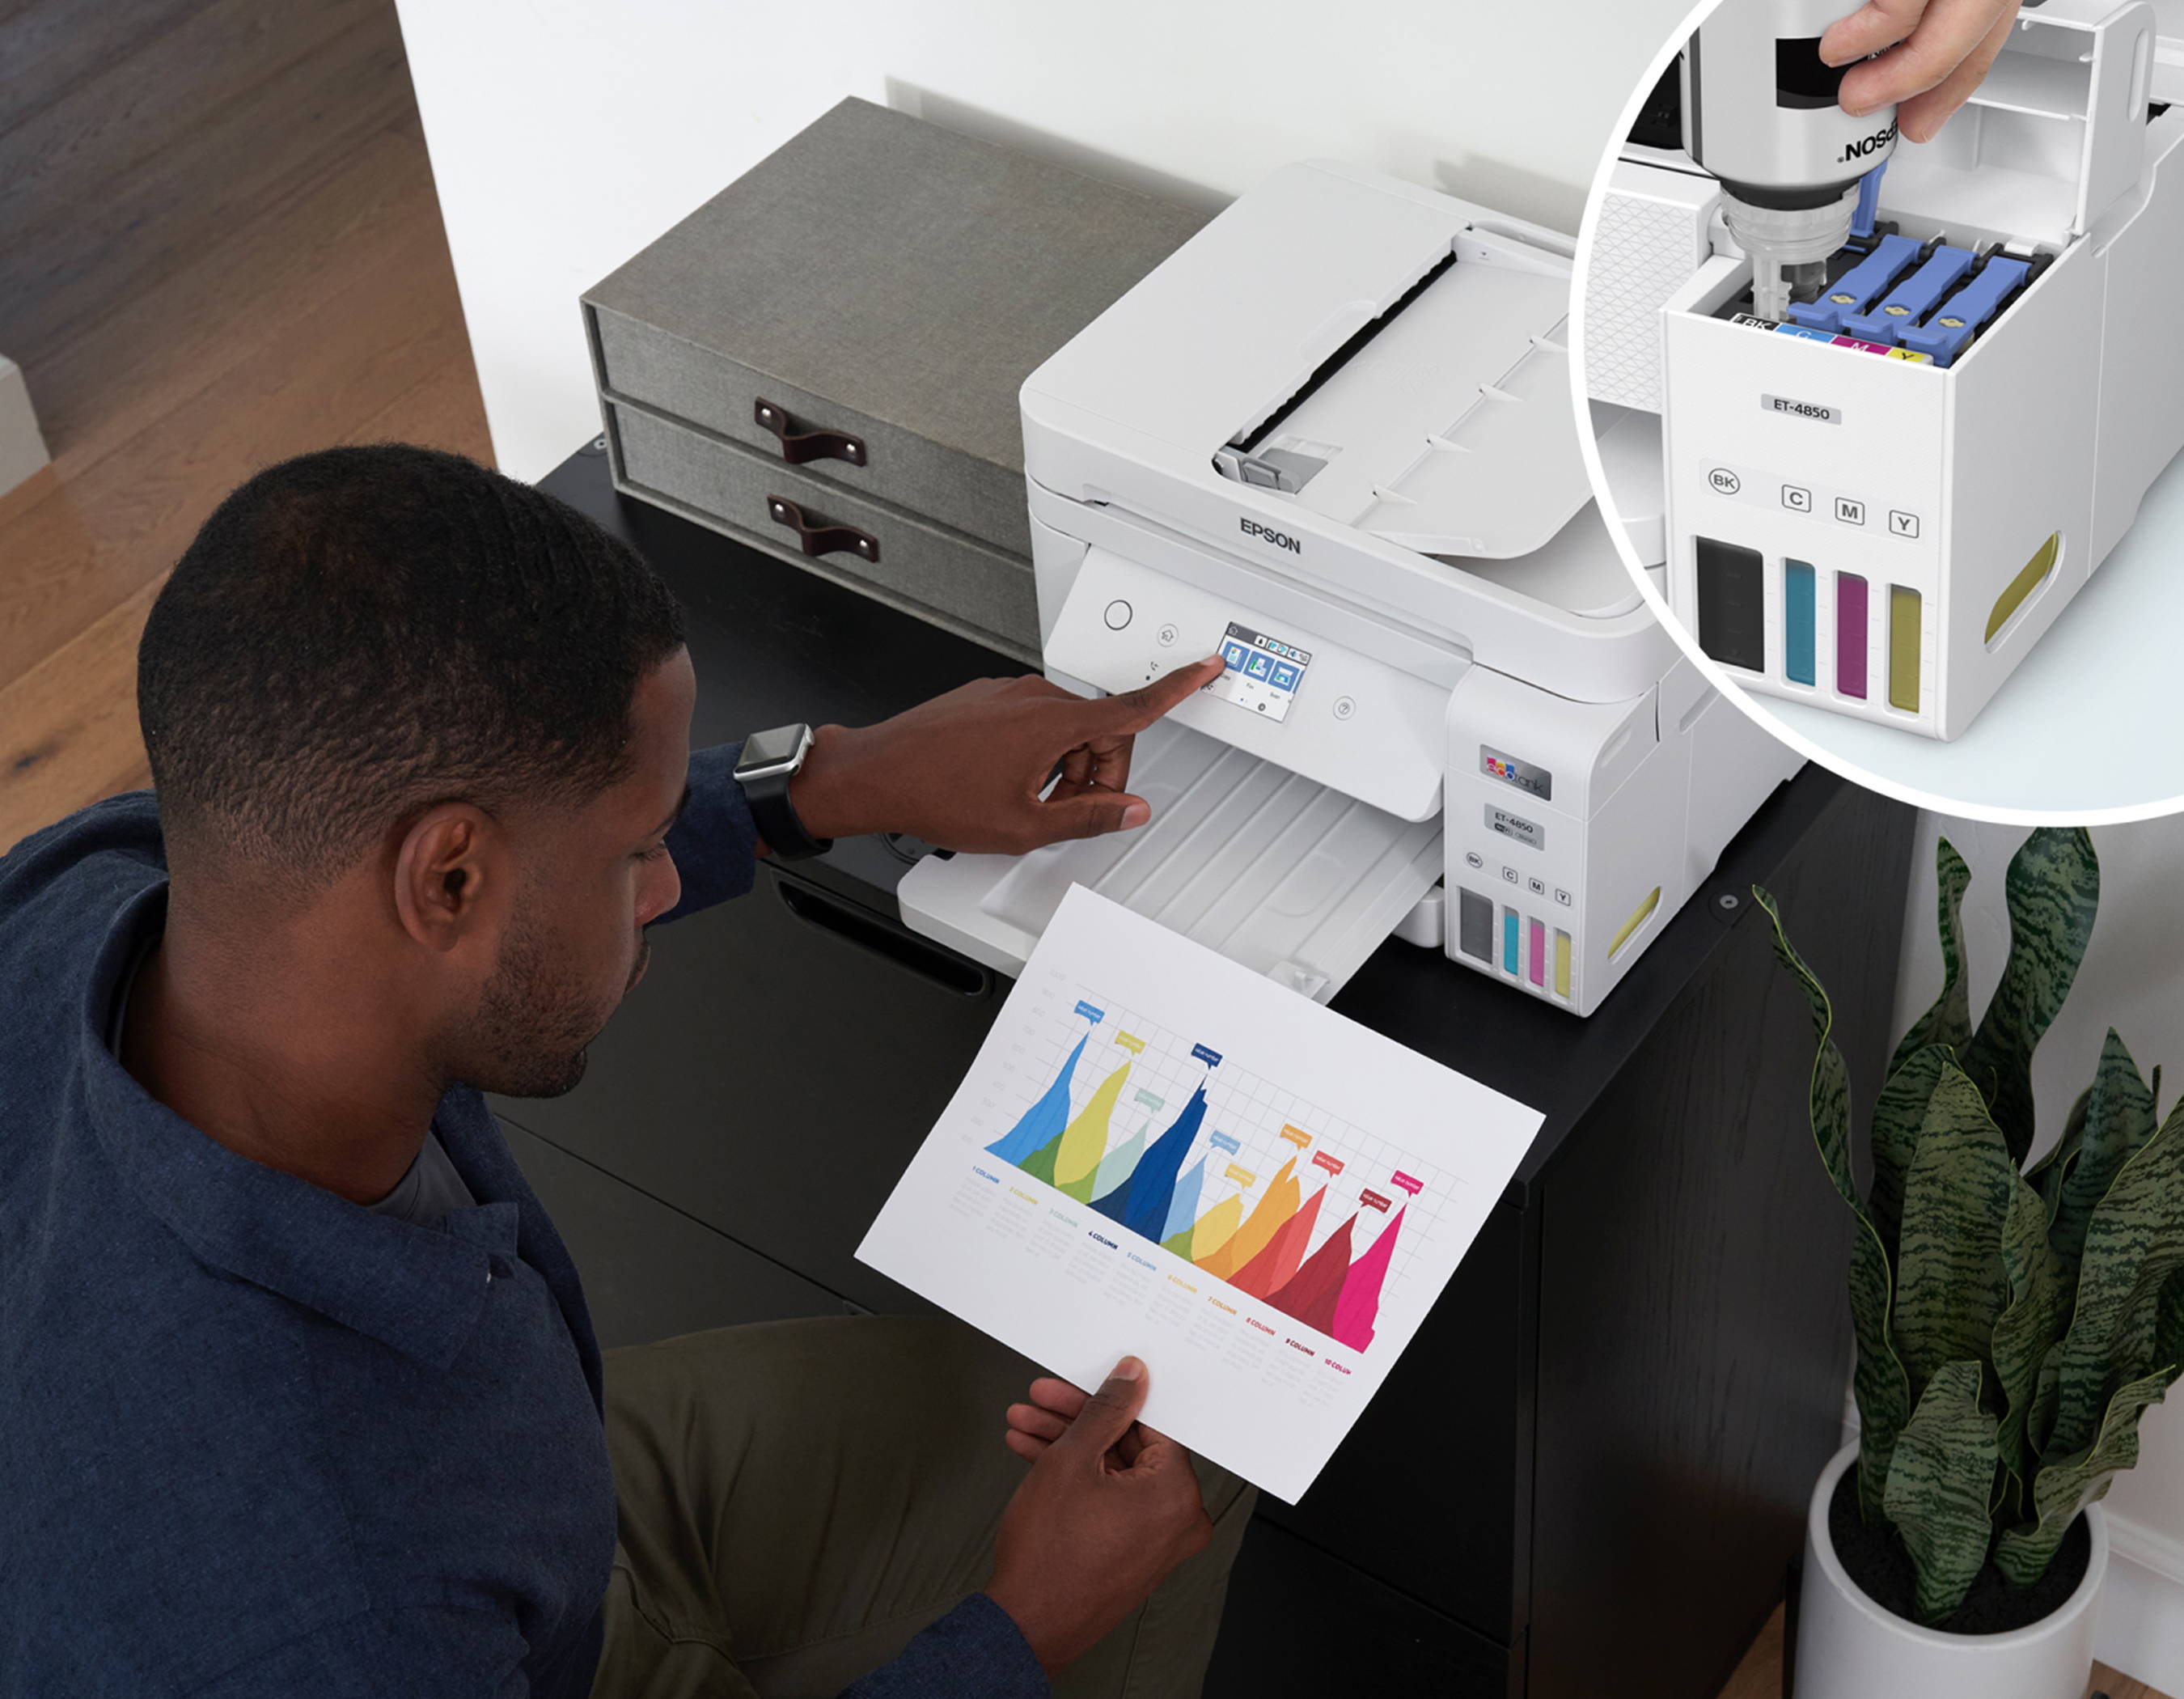 A man checks ink levels on his Epson printer. An in-set image in the upper right corner highlights Epson's EcoTank cartridge-free printing technology.